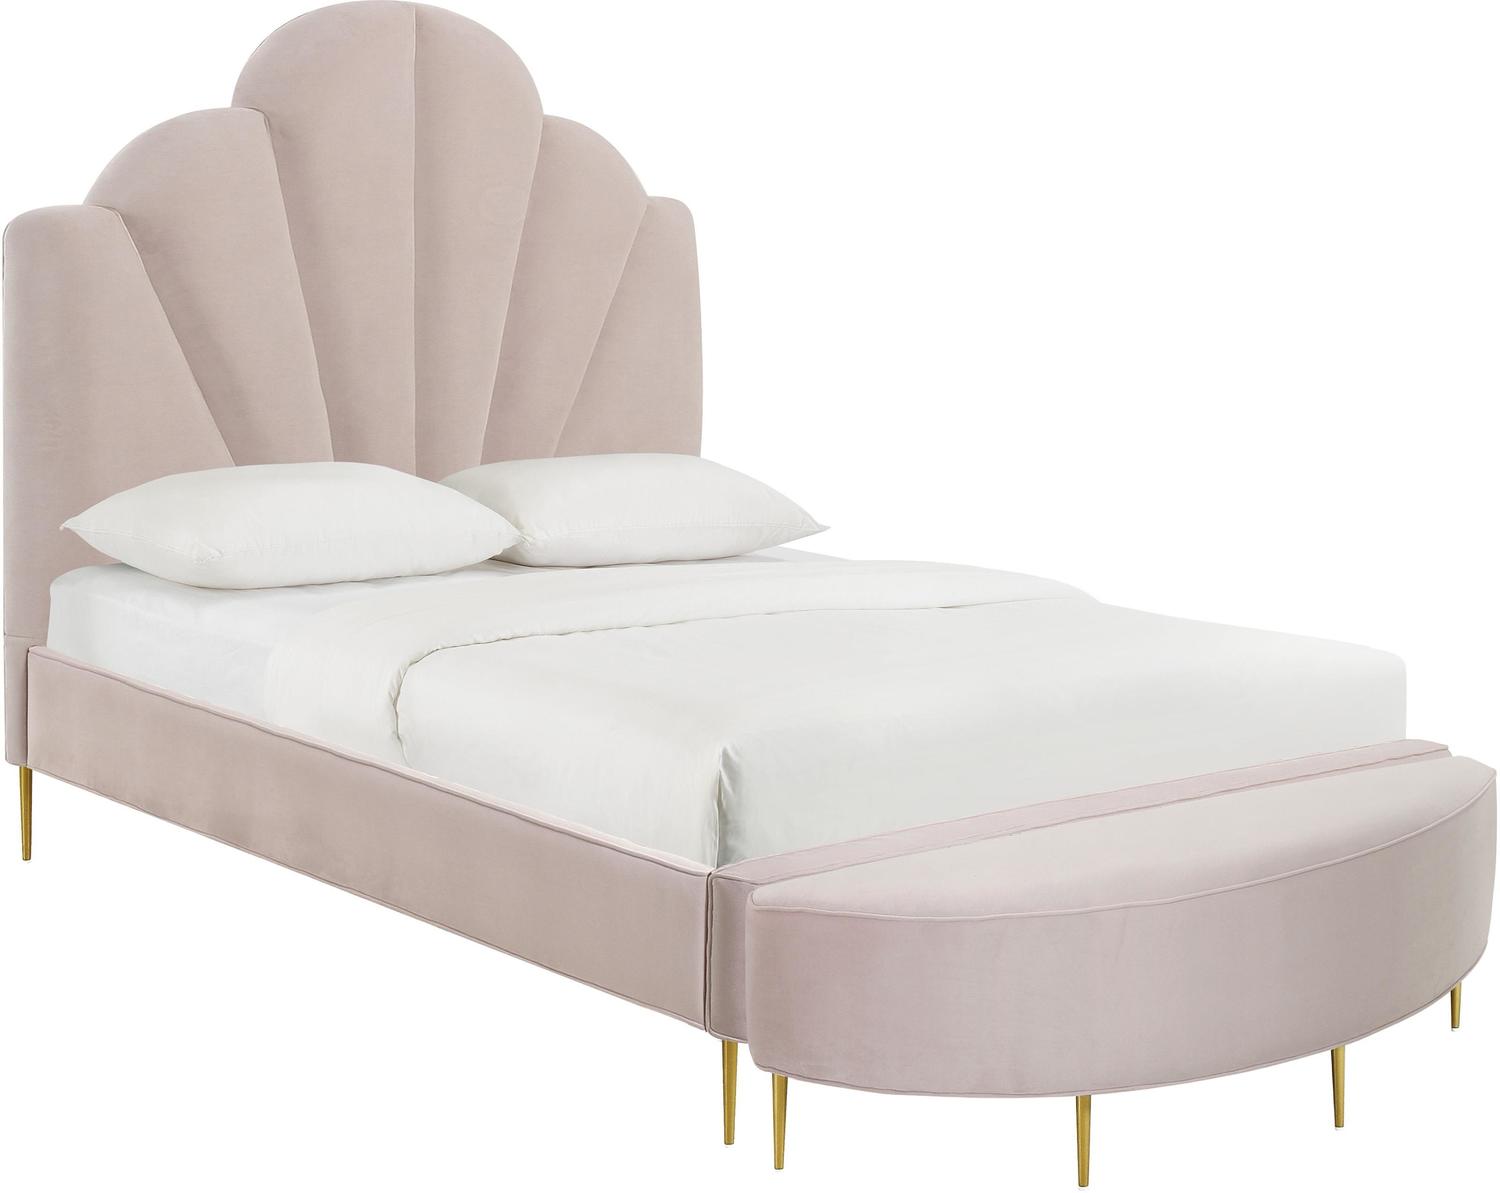 modern king size bed frame with headboard Tov Furniture Beds Blush